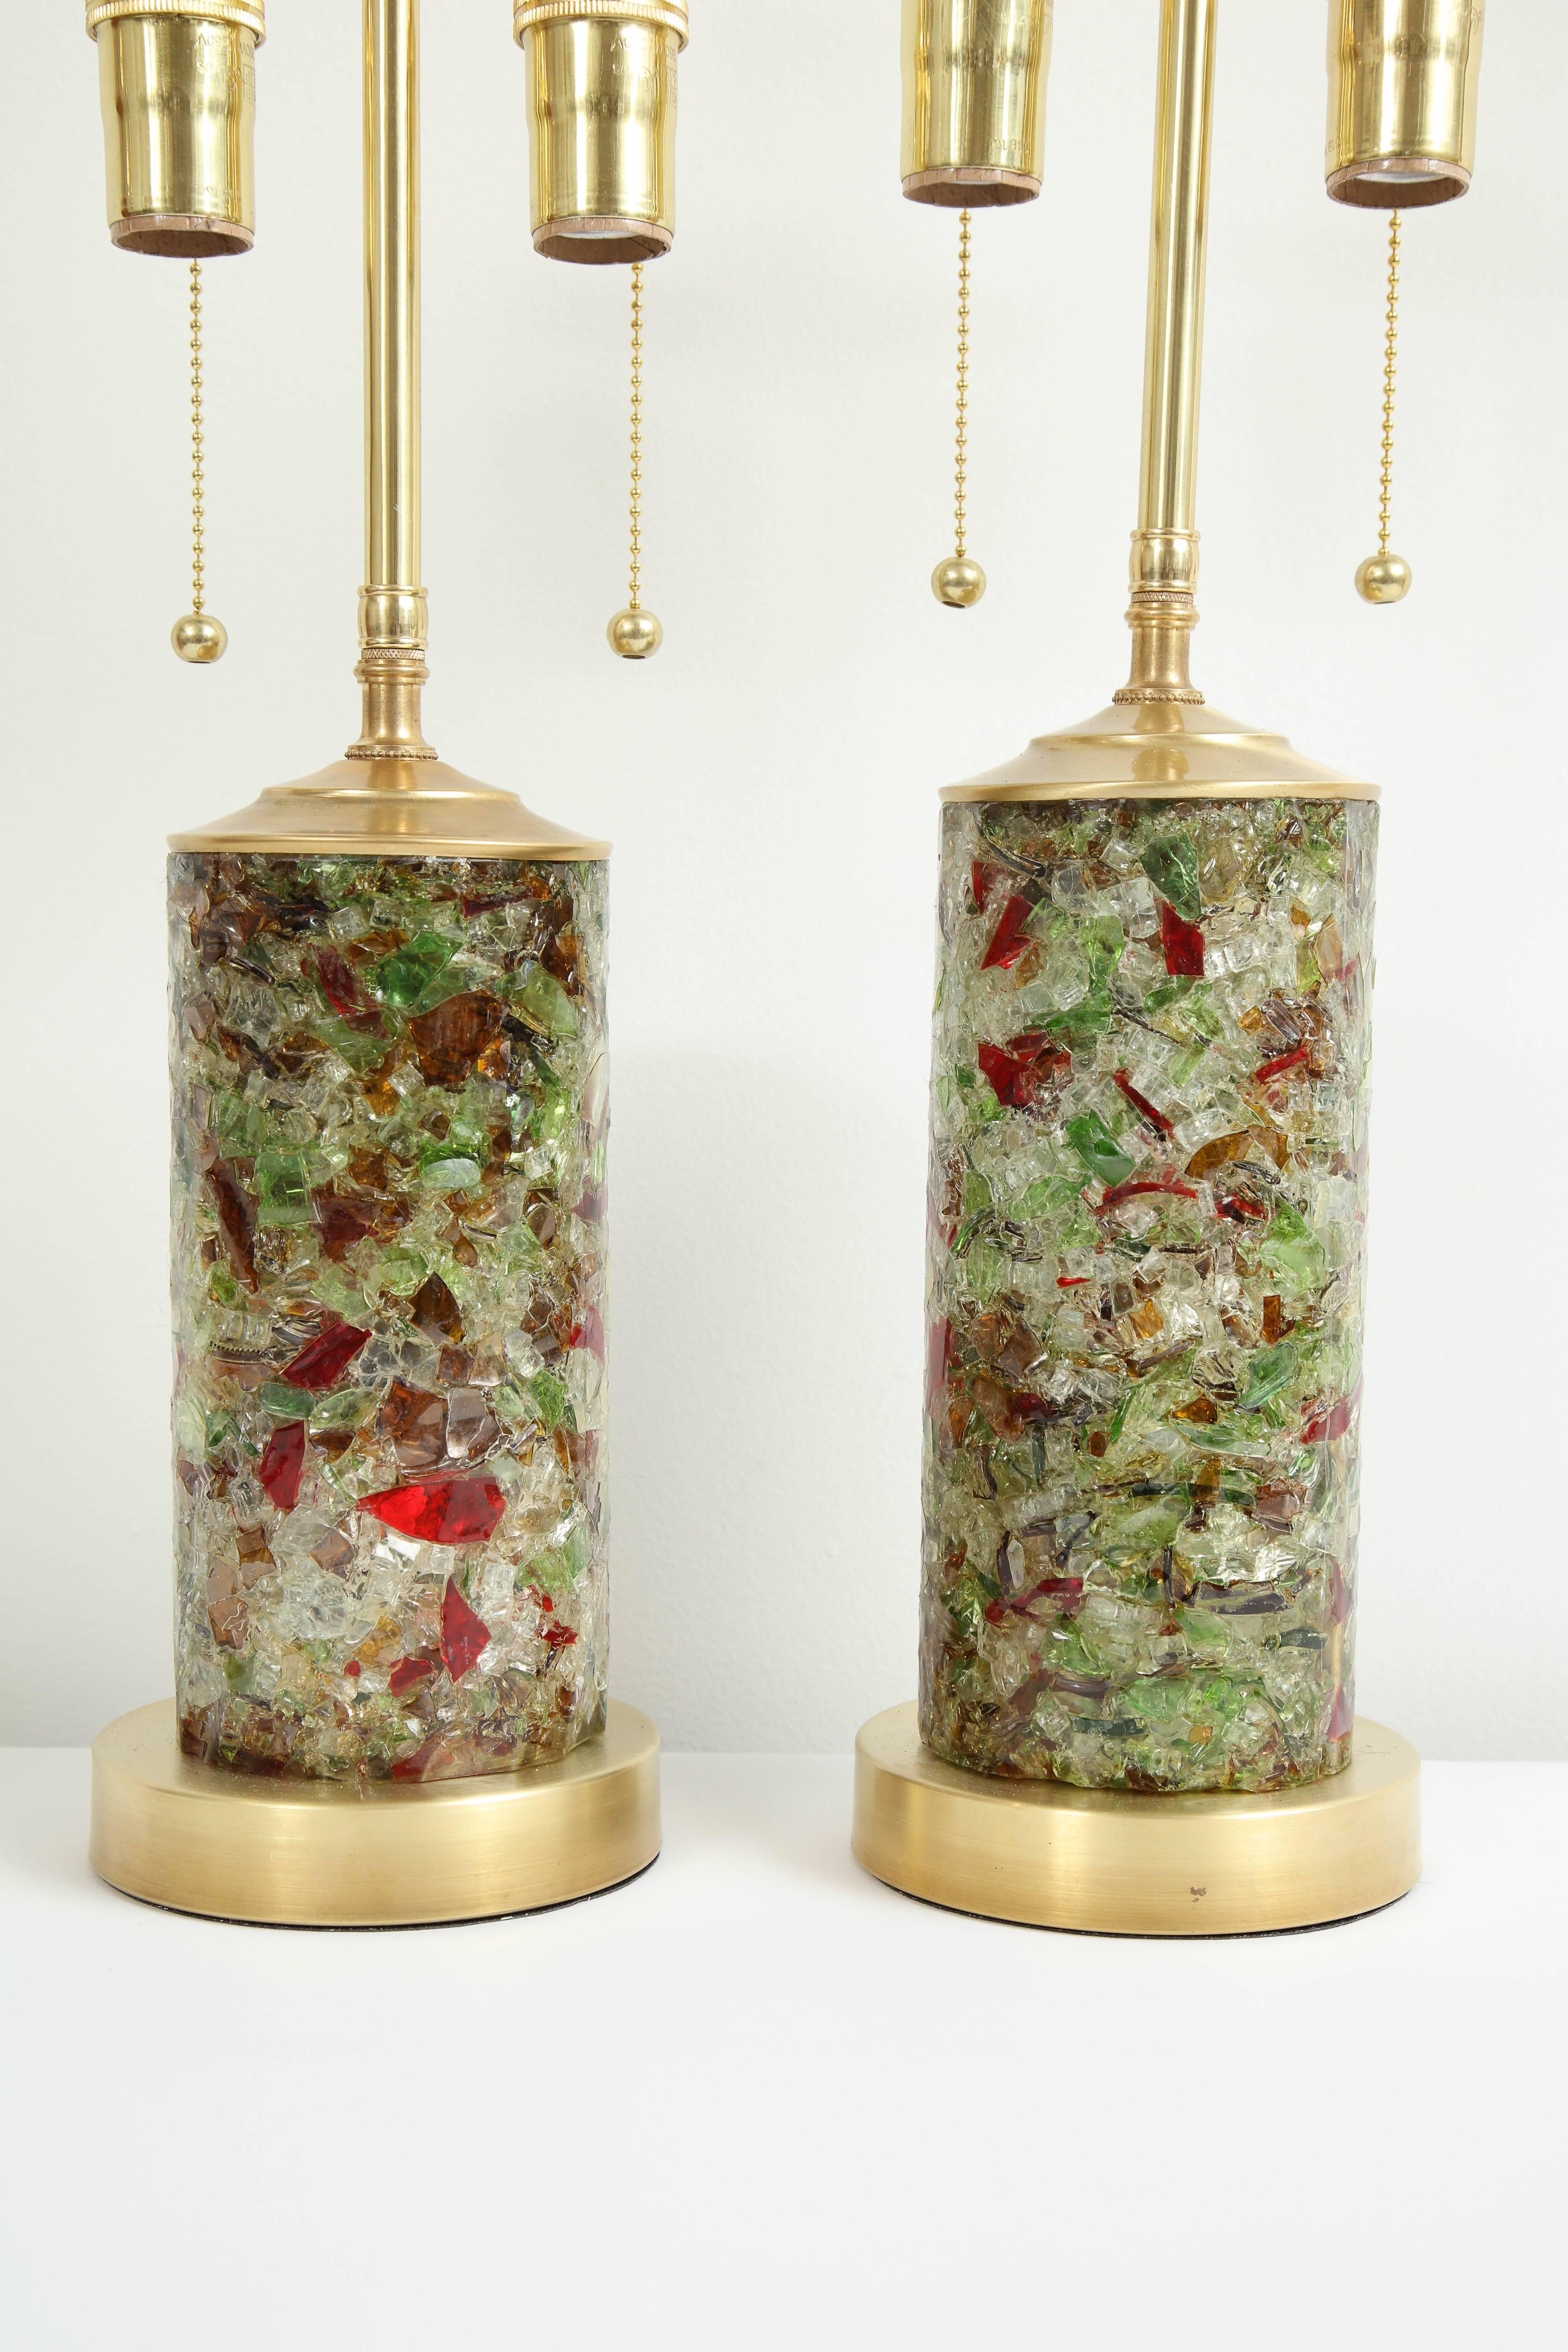 Wonderful pair of 1960s French Resin lamps.
The lamp bodies are handmade and therefore are very slightly different in size. They are made of compressed fractured pieces of green, red and clear fragments which are embedded in to the resin and sit on